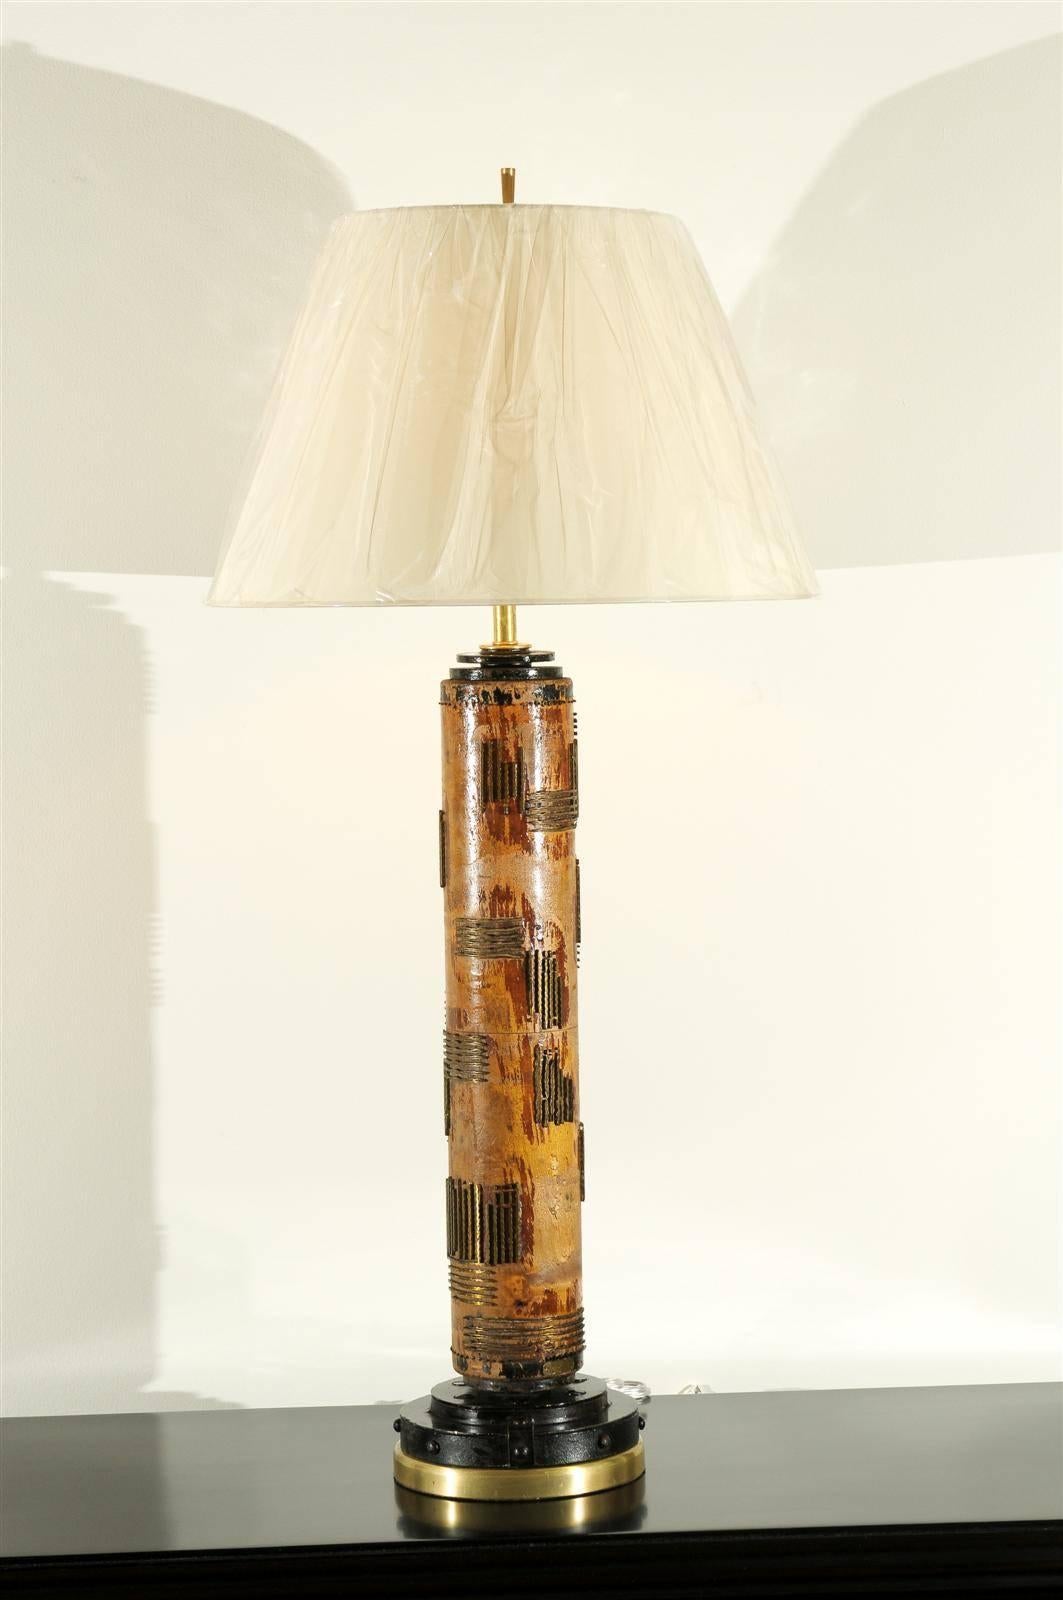 A stunning pair of large-scale vintage wallpaper rollers as lamps, circa 1940. Heavy hardwood cylinder form decorated with solid brass motifs. Accents of lacquered steel and brass. Exquisite jewelry! Excellent restored condition. Rewired using clear